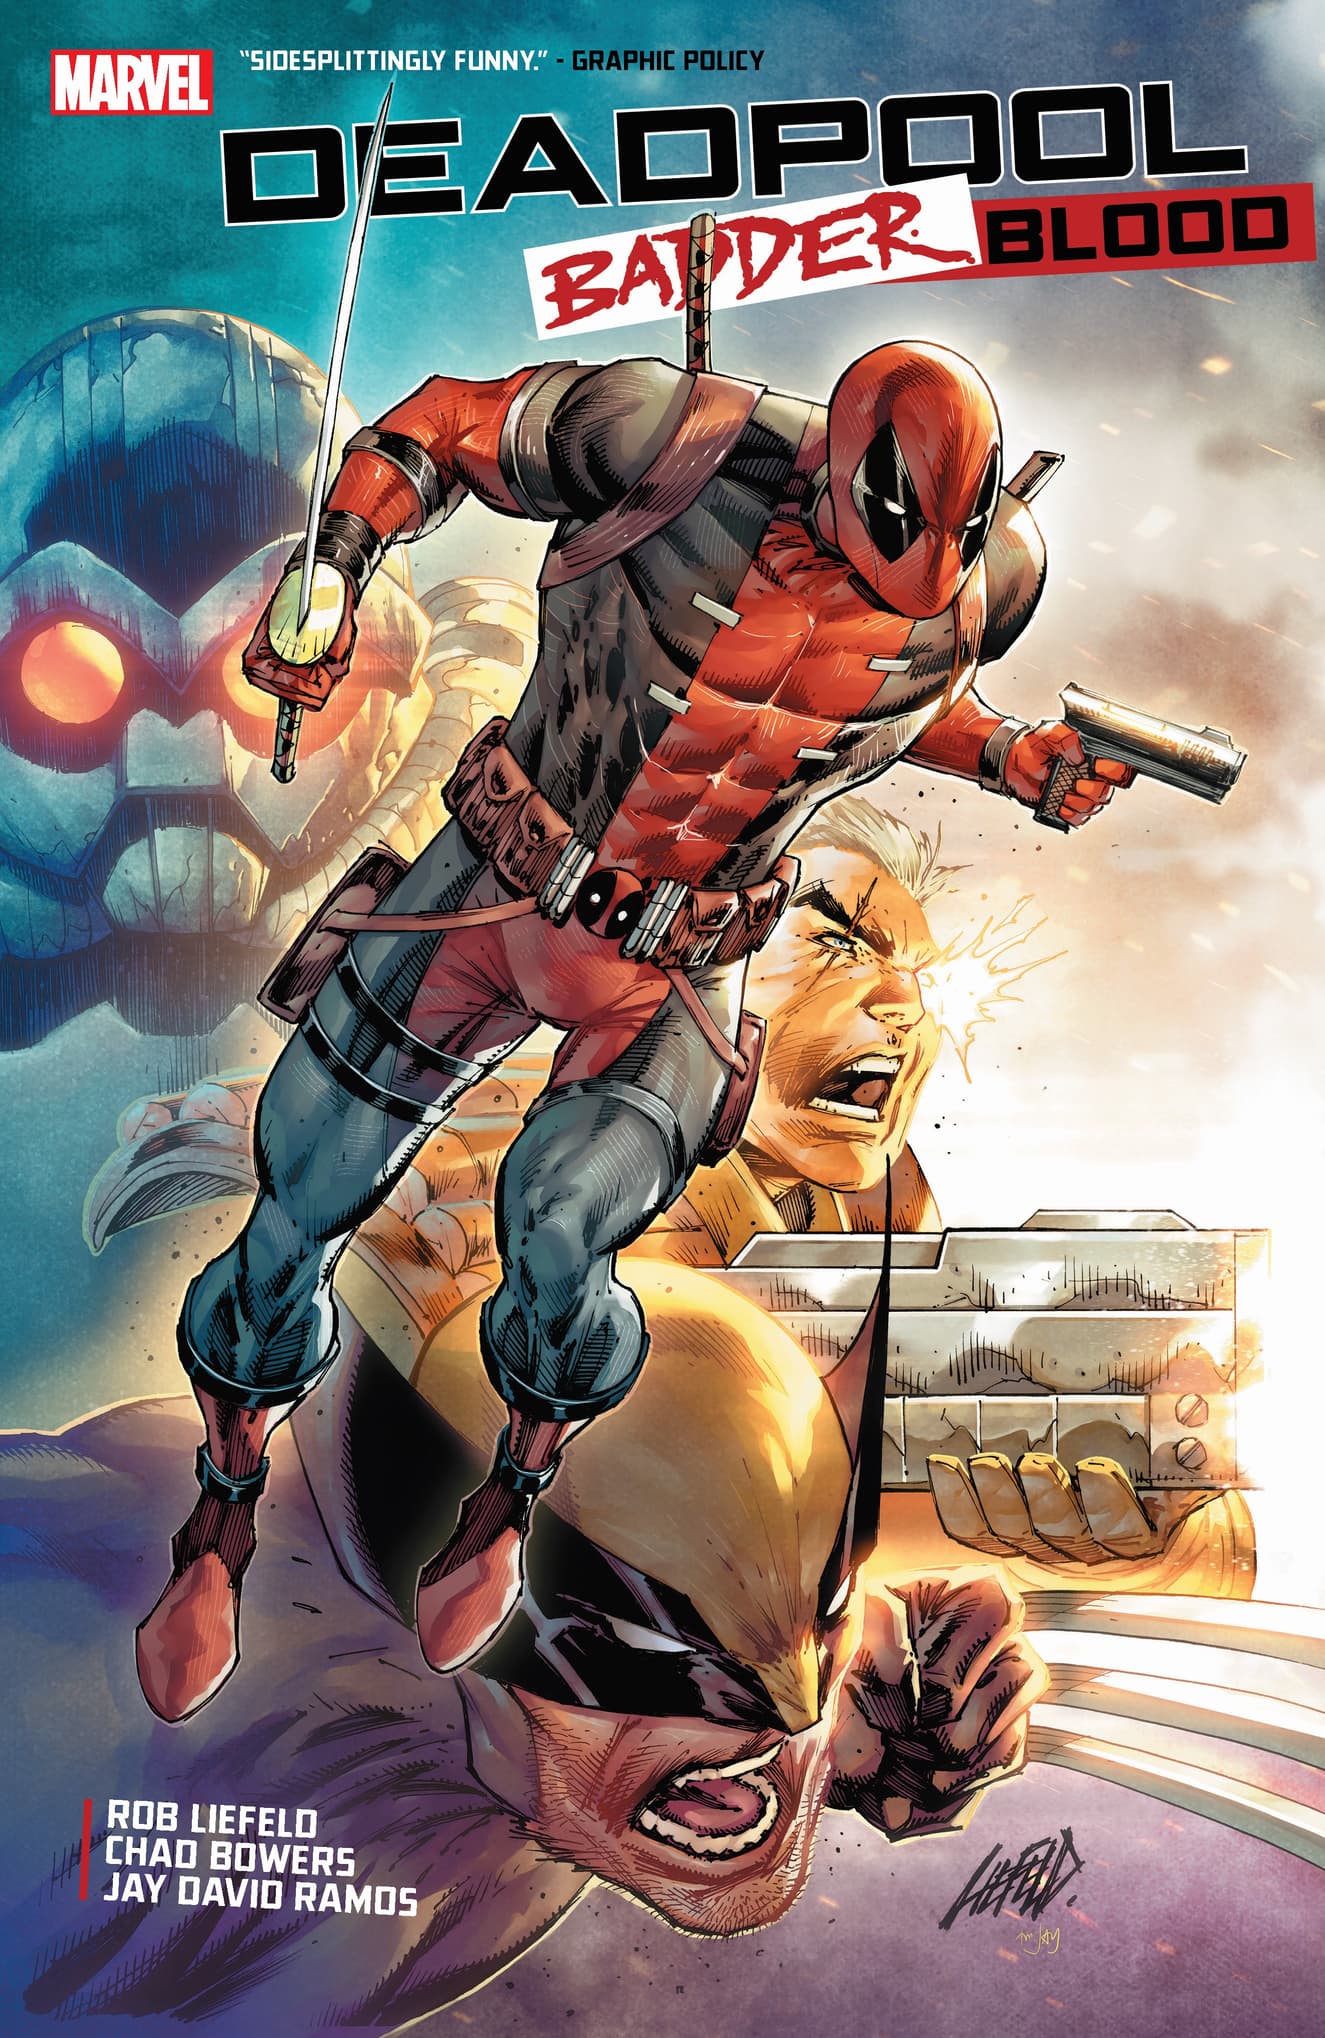 DEADPOOL: BADDER BLOOD cover by Rob Liefeld